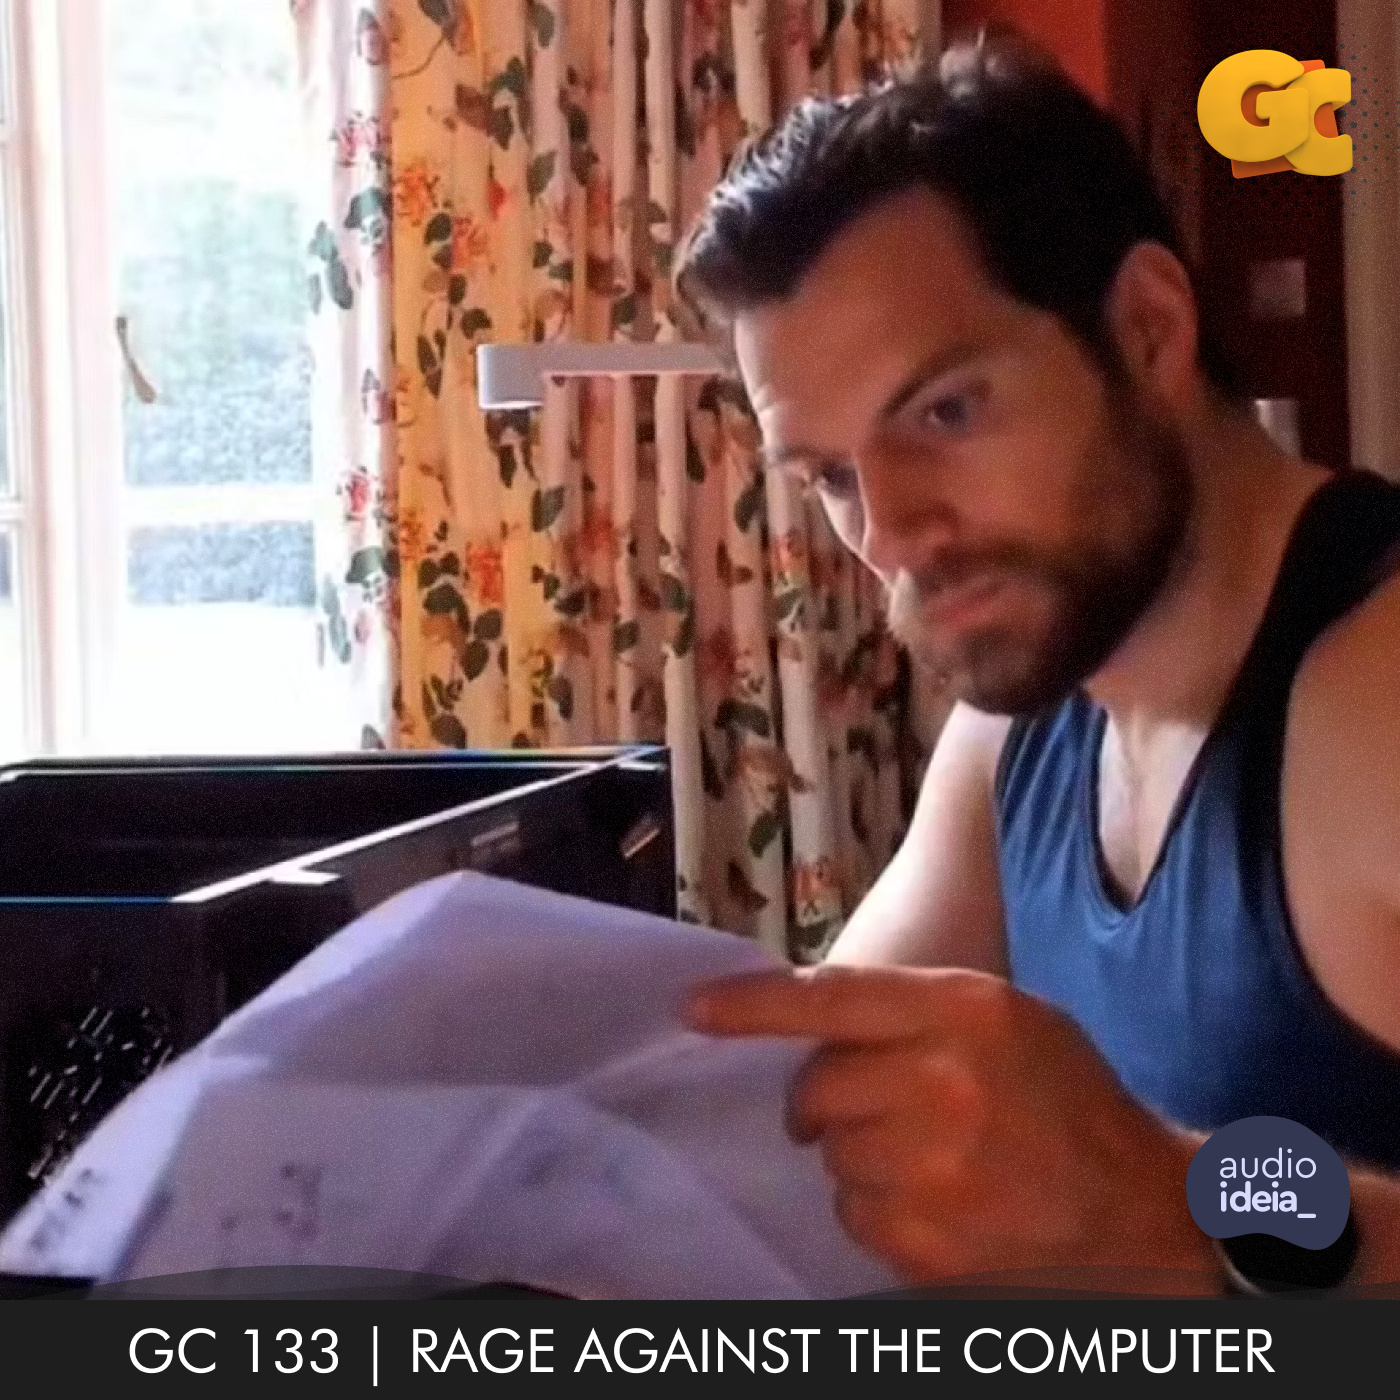 GC 133 | RAGE AGAINST THE COMPUTER